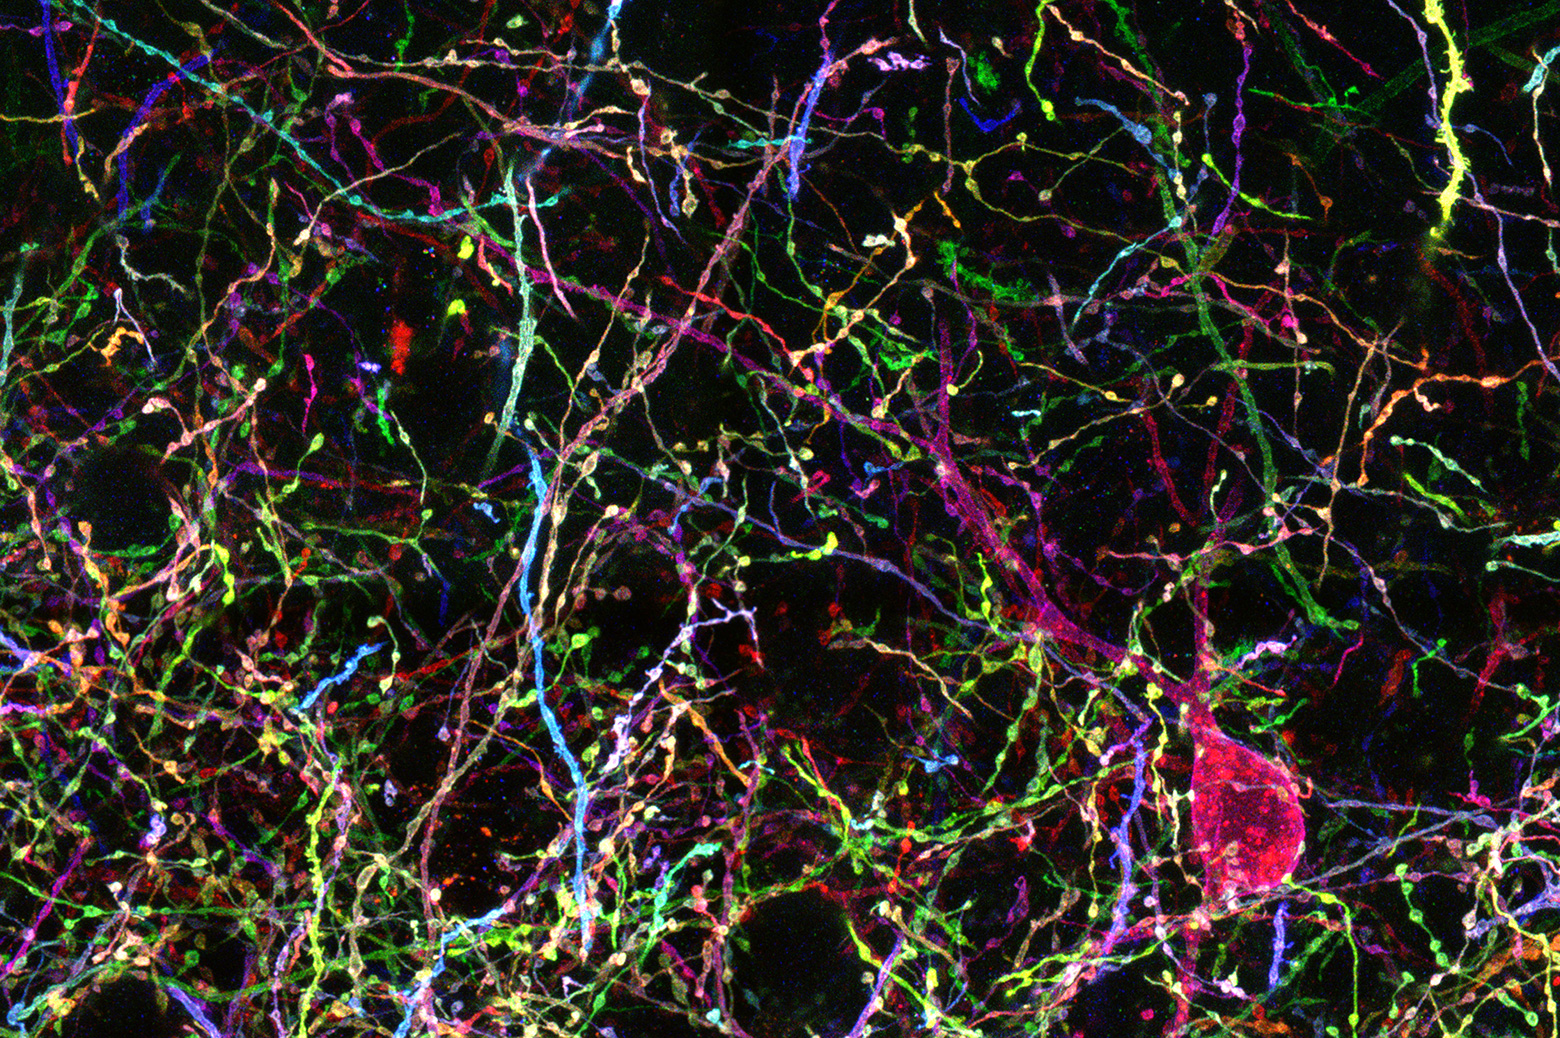 A multicolored web neurons, all long strands connecting rounder cell bodies